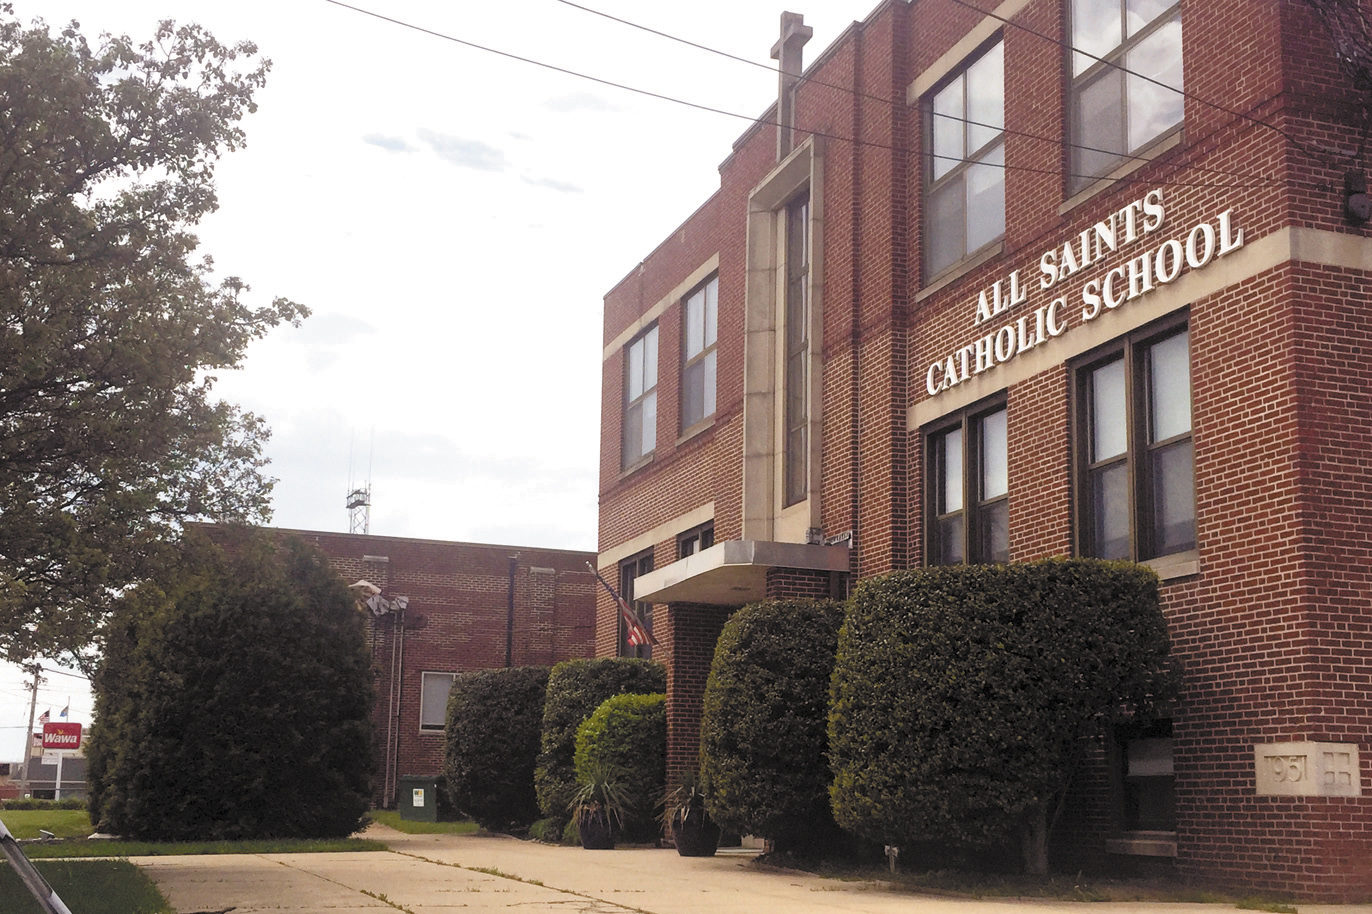 All Saints Catholic School in Elsmere to close at the end of 2020